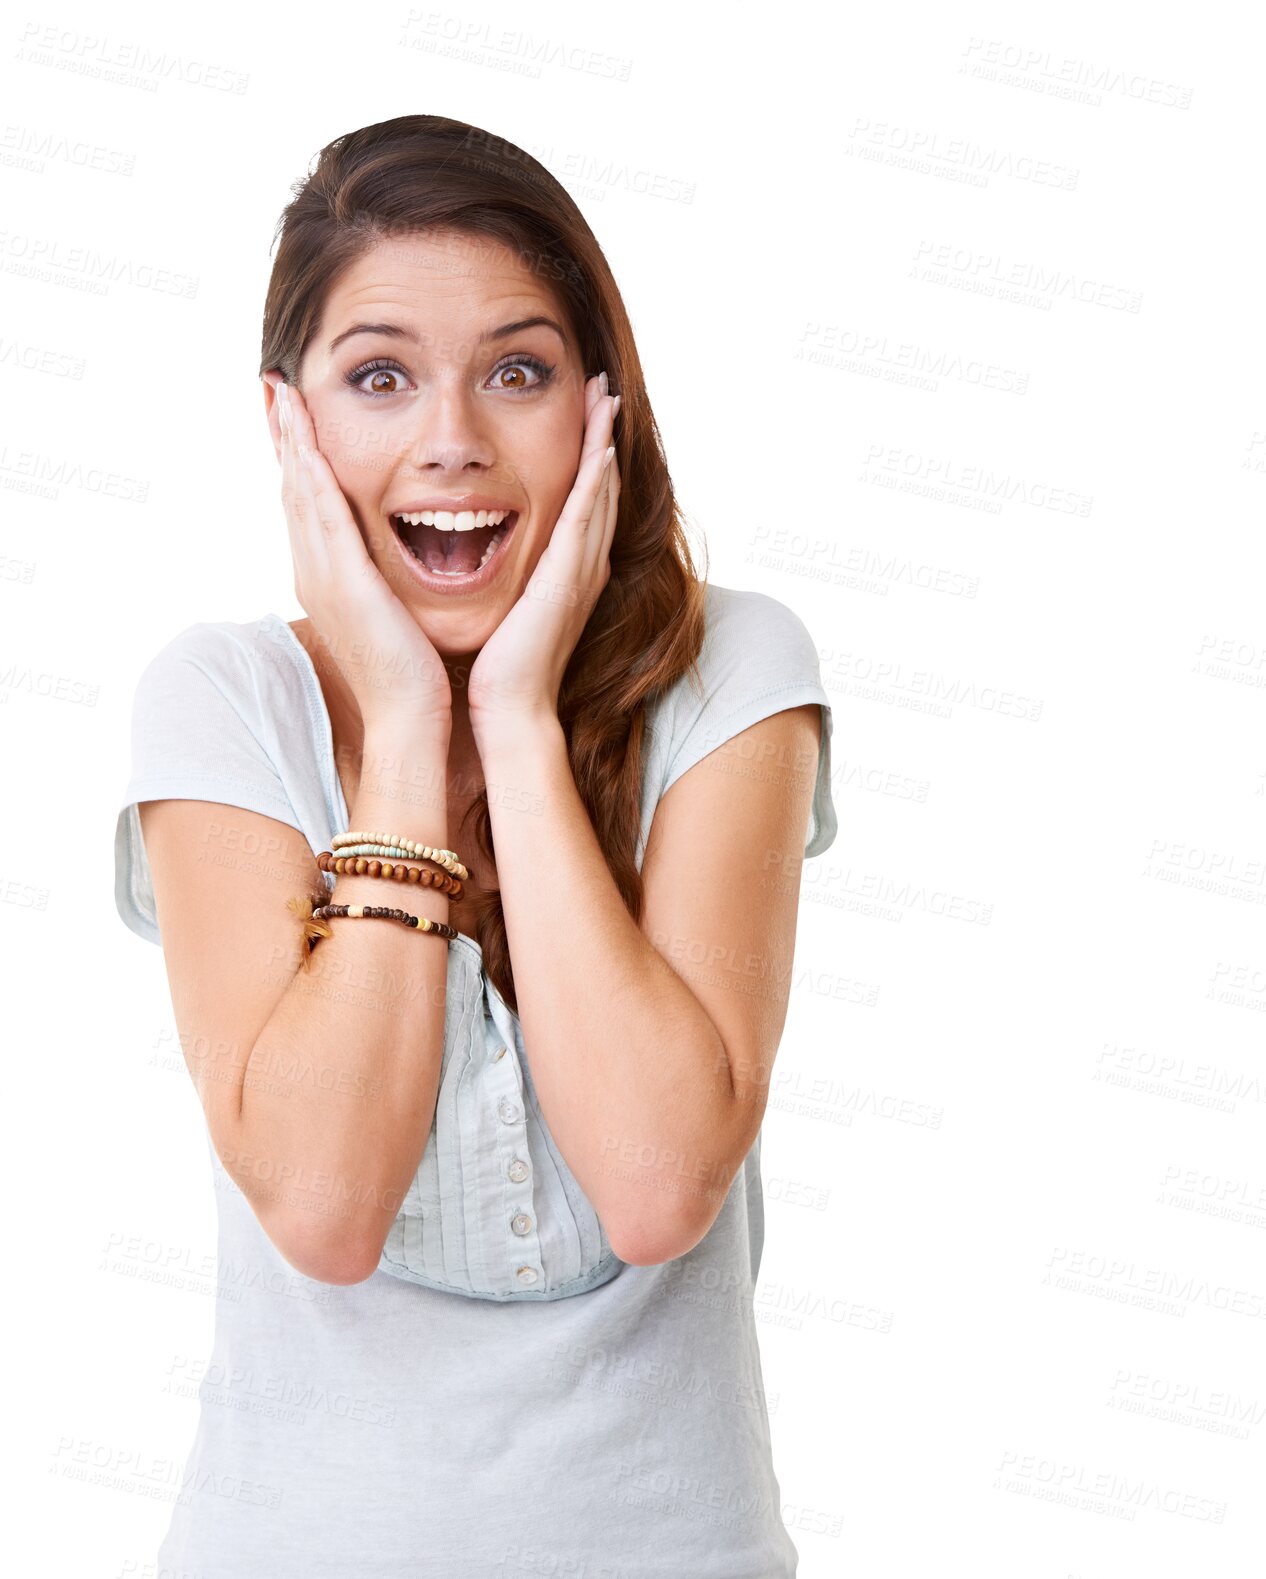 Buy stock photo Winner, surprise and portrait of woman excited on png, isolated and transparent background. Emoji, wow and female person with shock, omg and wtf face expression for announcement, good news or winning